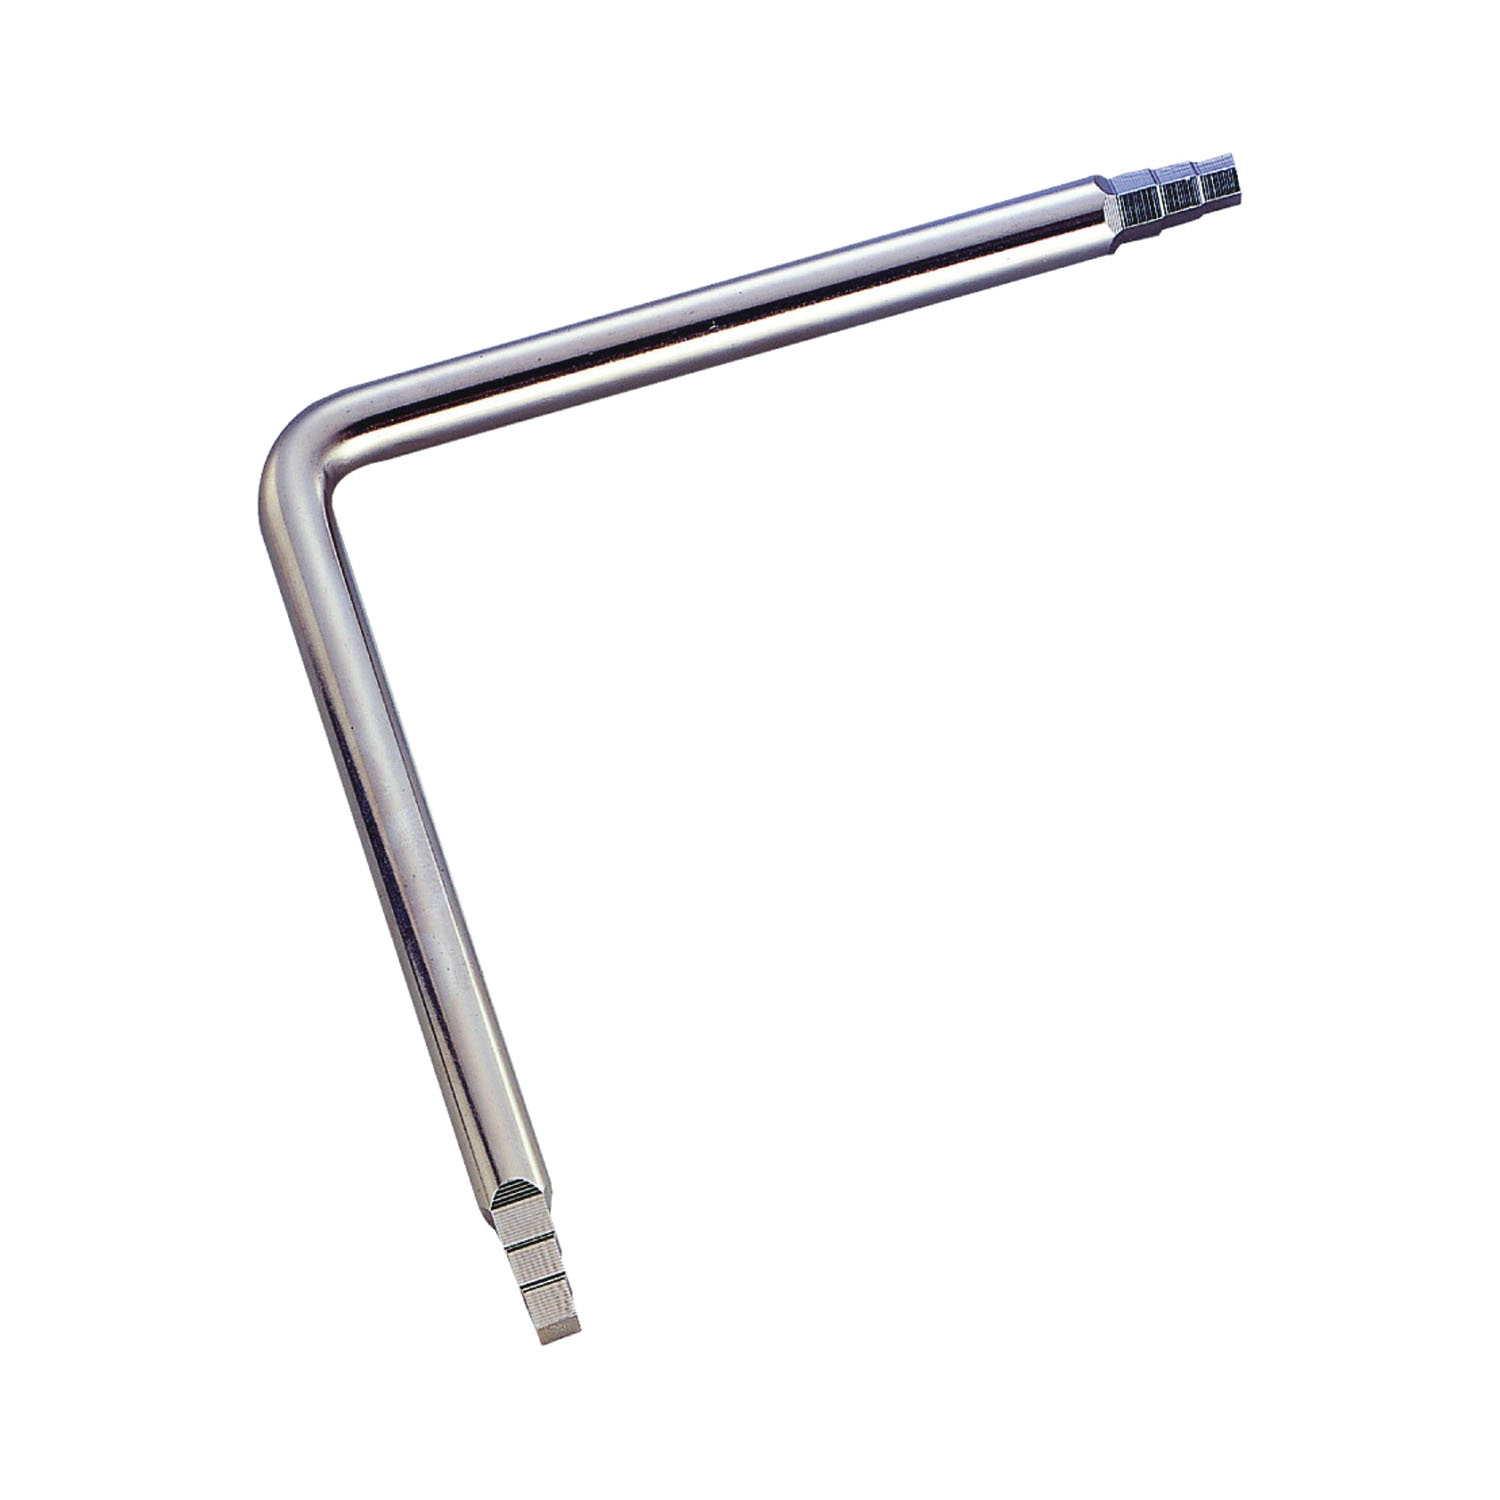 T157-3L Faucet Seat Wrench, 6 in L, Steel, Nickel Plated